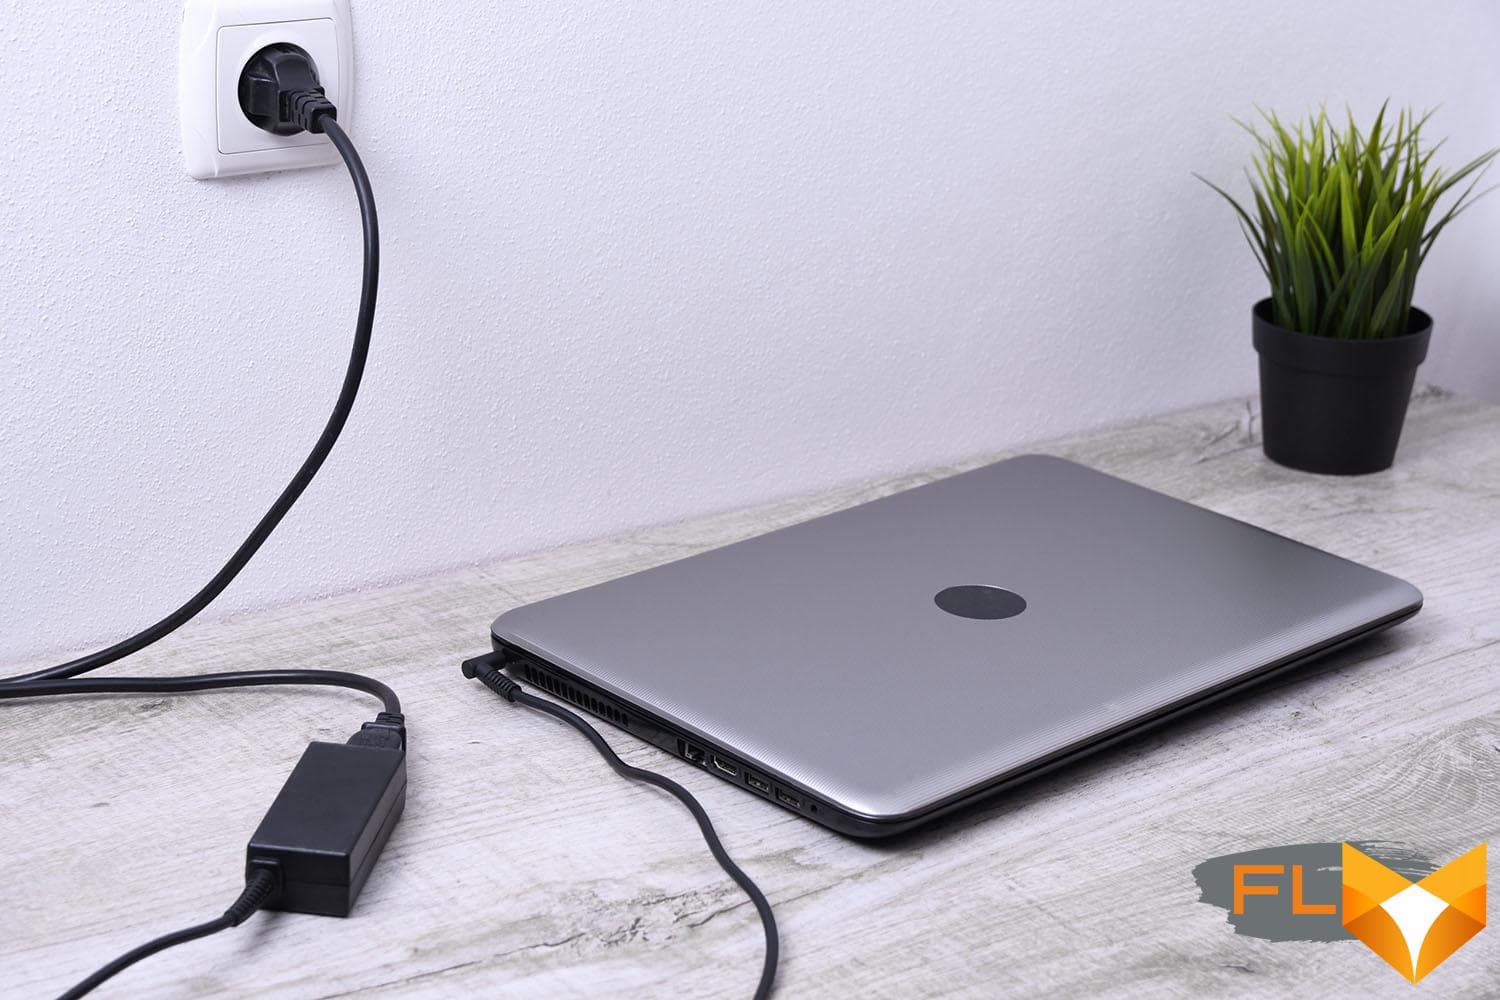 How to Charge Laptop with HDMI